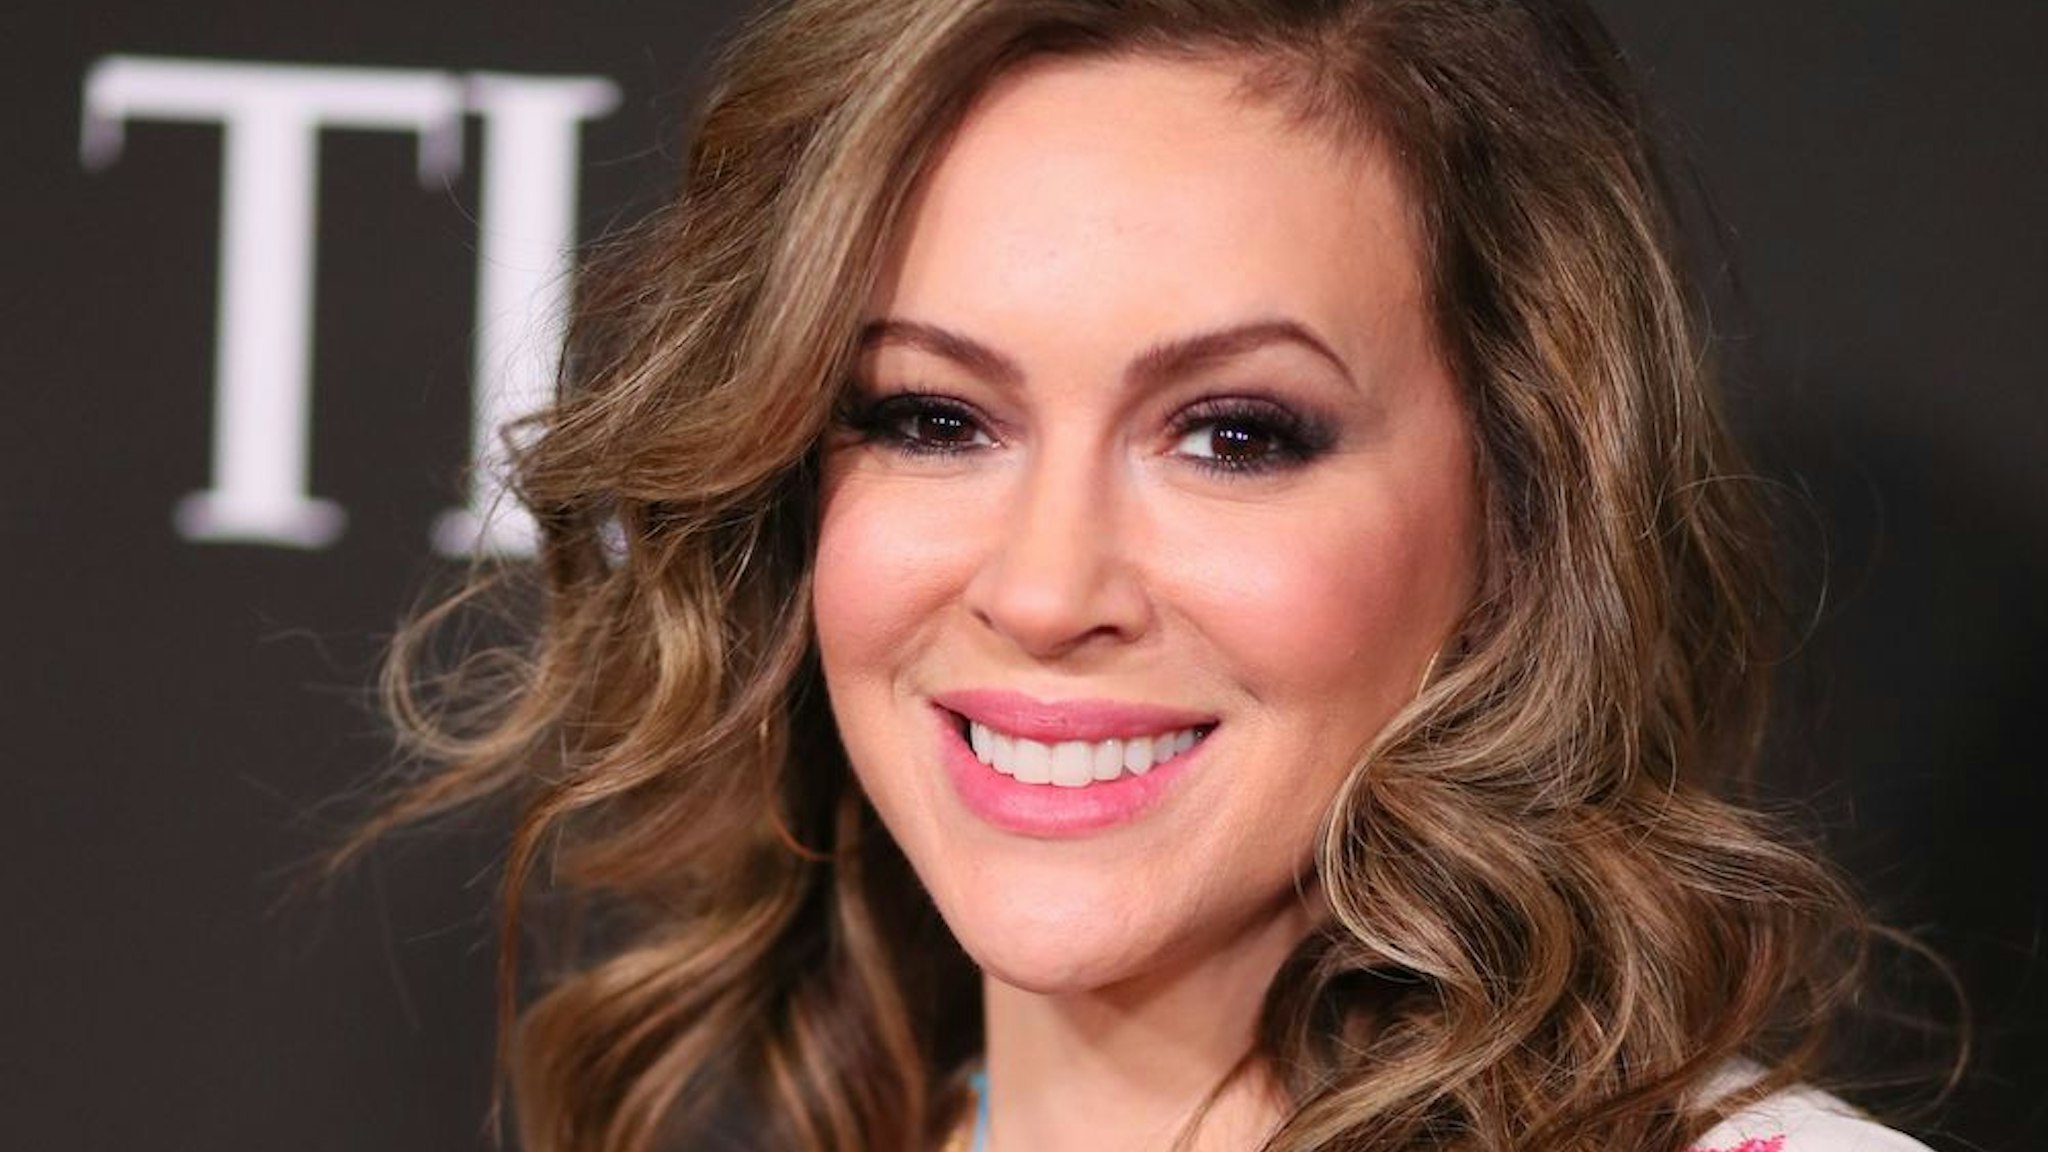 Actress Alyssa Milano arrives for the 10th Anniversary CORE (Community Organized Relief Effort) Gala at the Wiltern theatre in Los Angeles on January 15, 2020. - CORE (formerly known as J/P HRO) is marking the 10th anniversary of both the devastating 2010 Haitian earthquake and the subsequent founding of this organization by Sean Penn. (Photo by Jean-Baptiste LACROIX / AFP